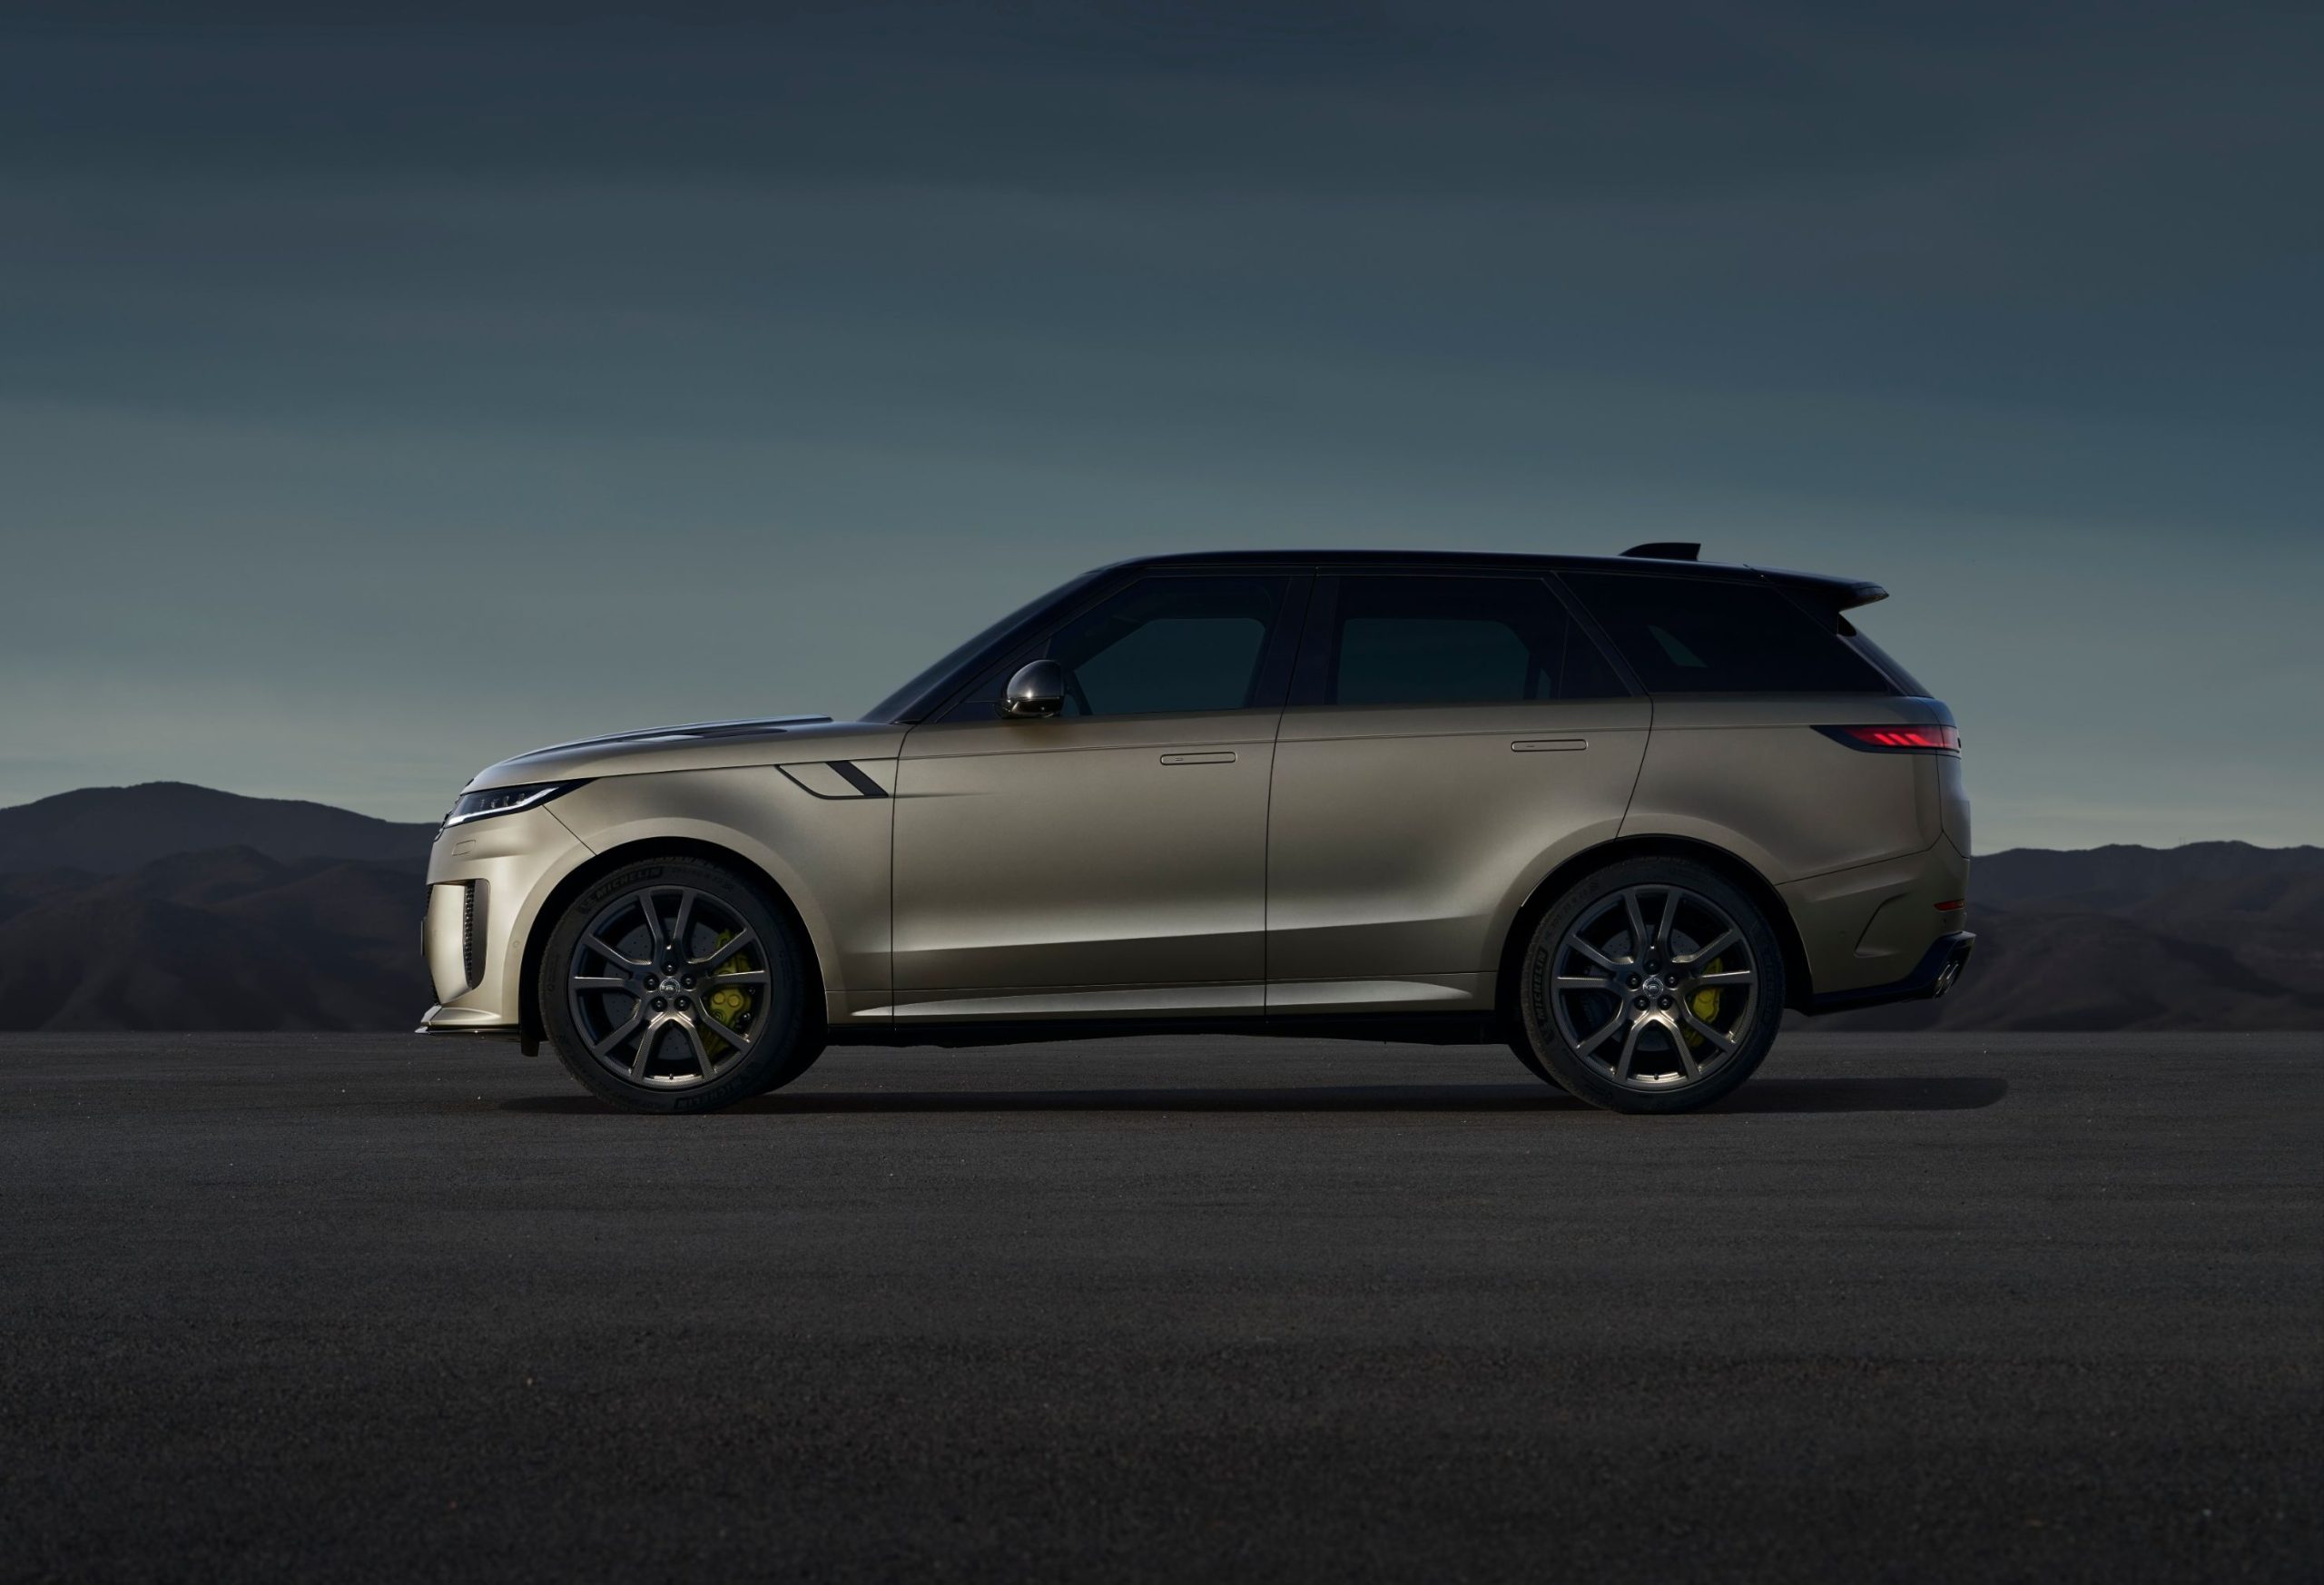 Refined Brutality: The Range Rover Sport SV Drives Up The Power